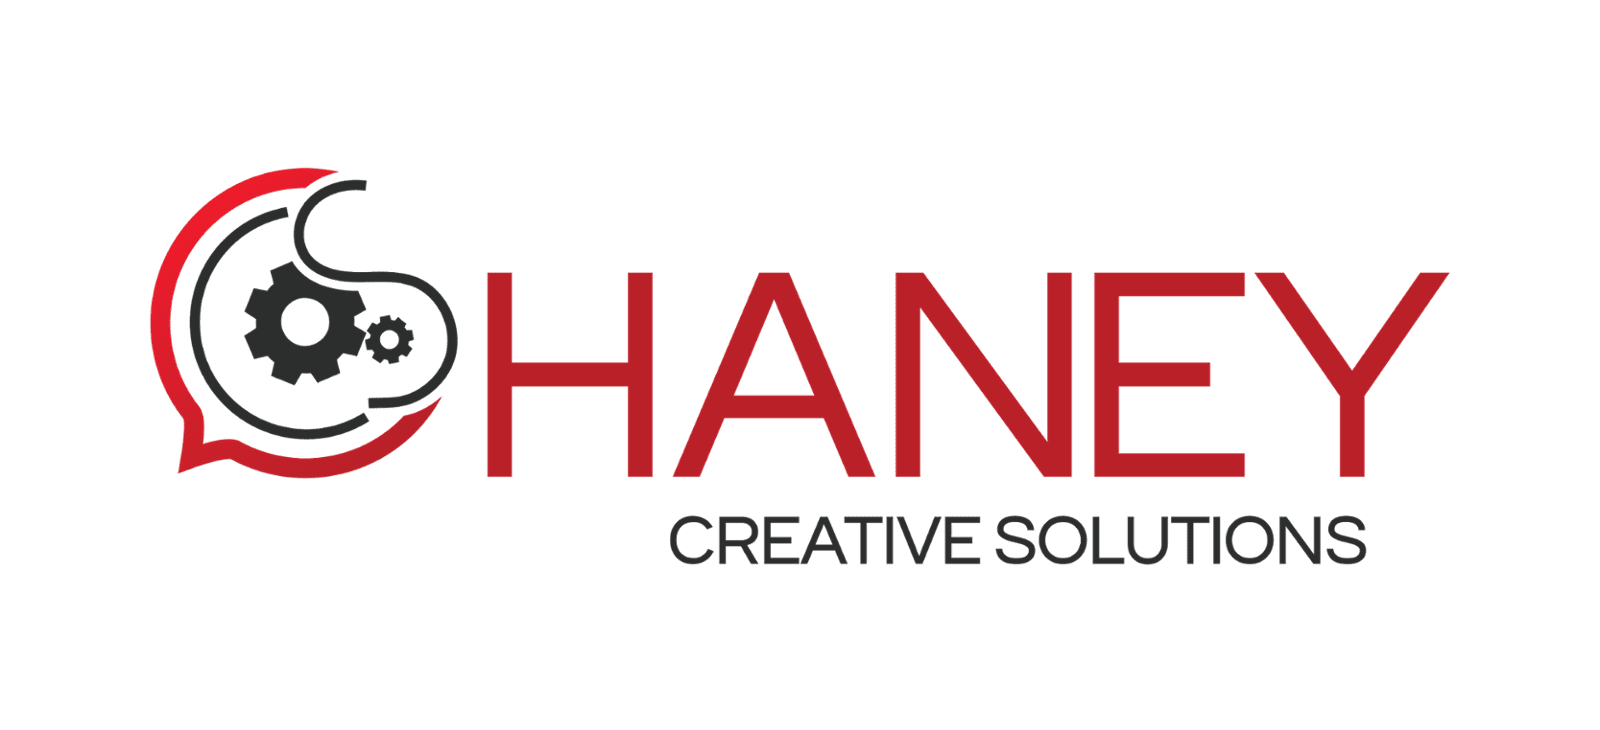 Chaney Creative Solutions